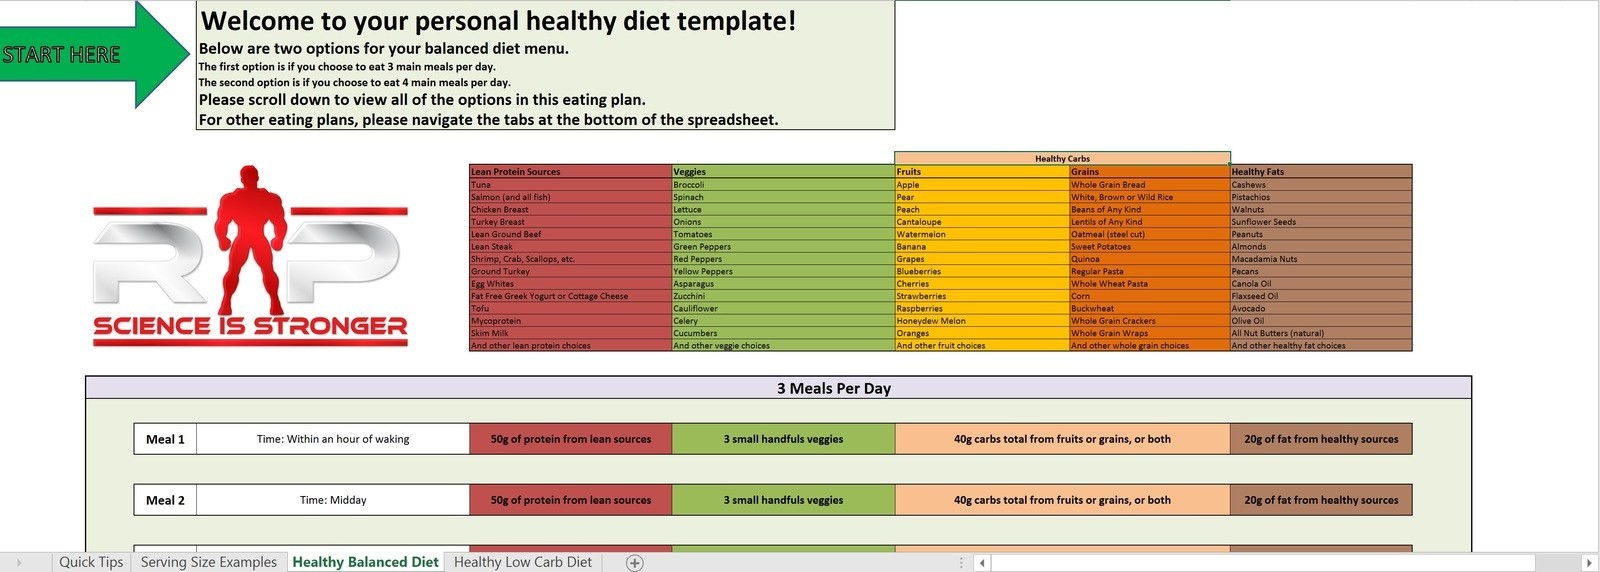 Renaissance Periodization Healthy Diet Templates What Is